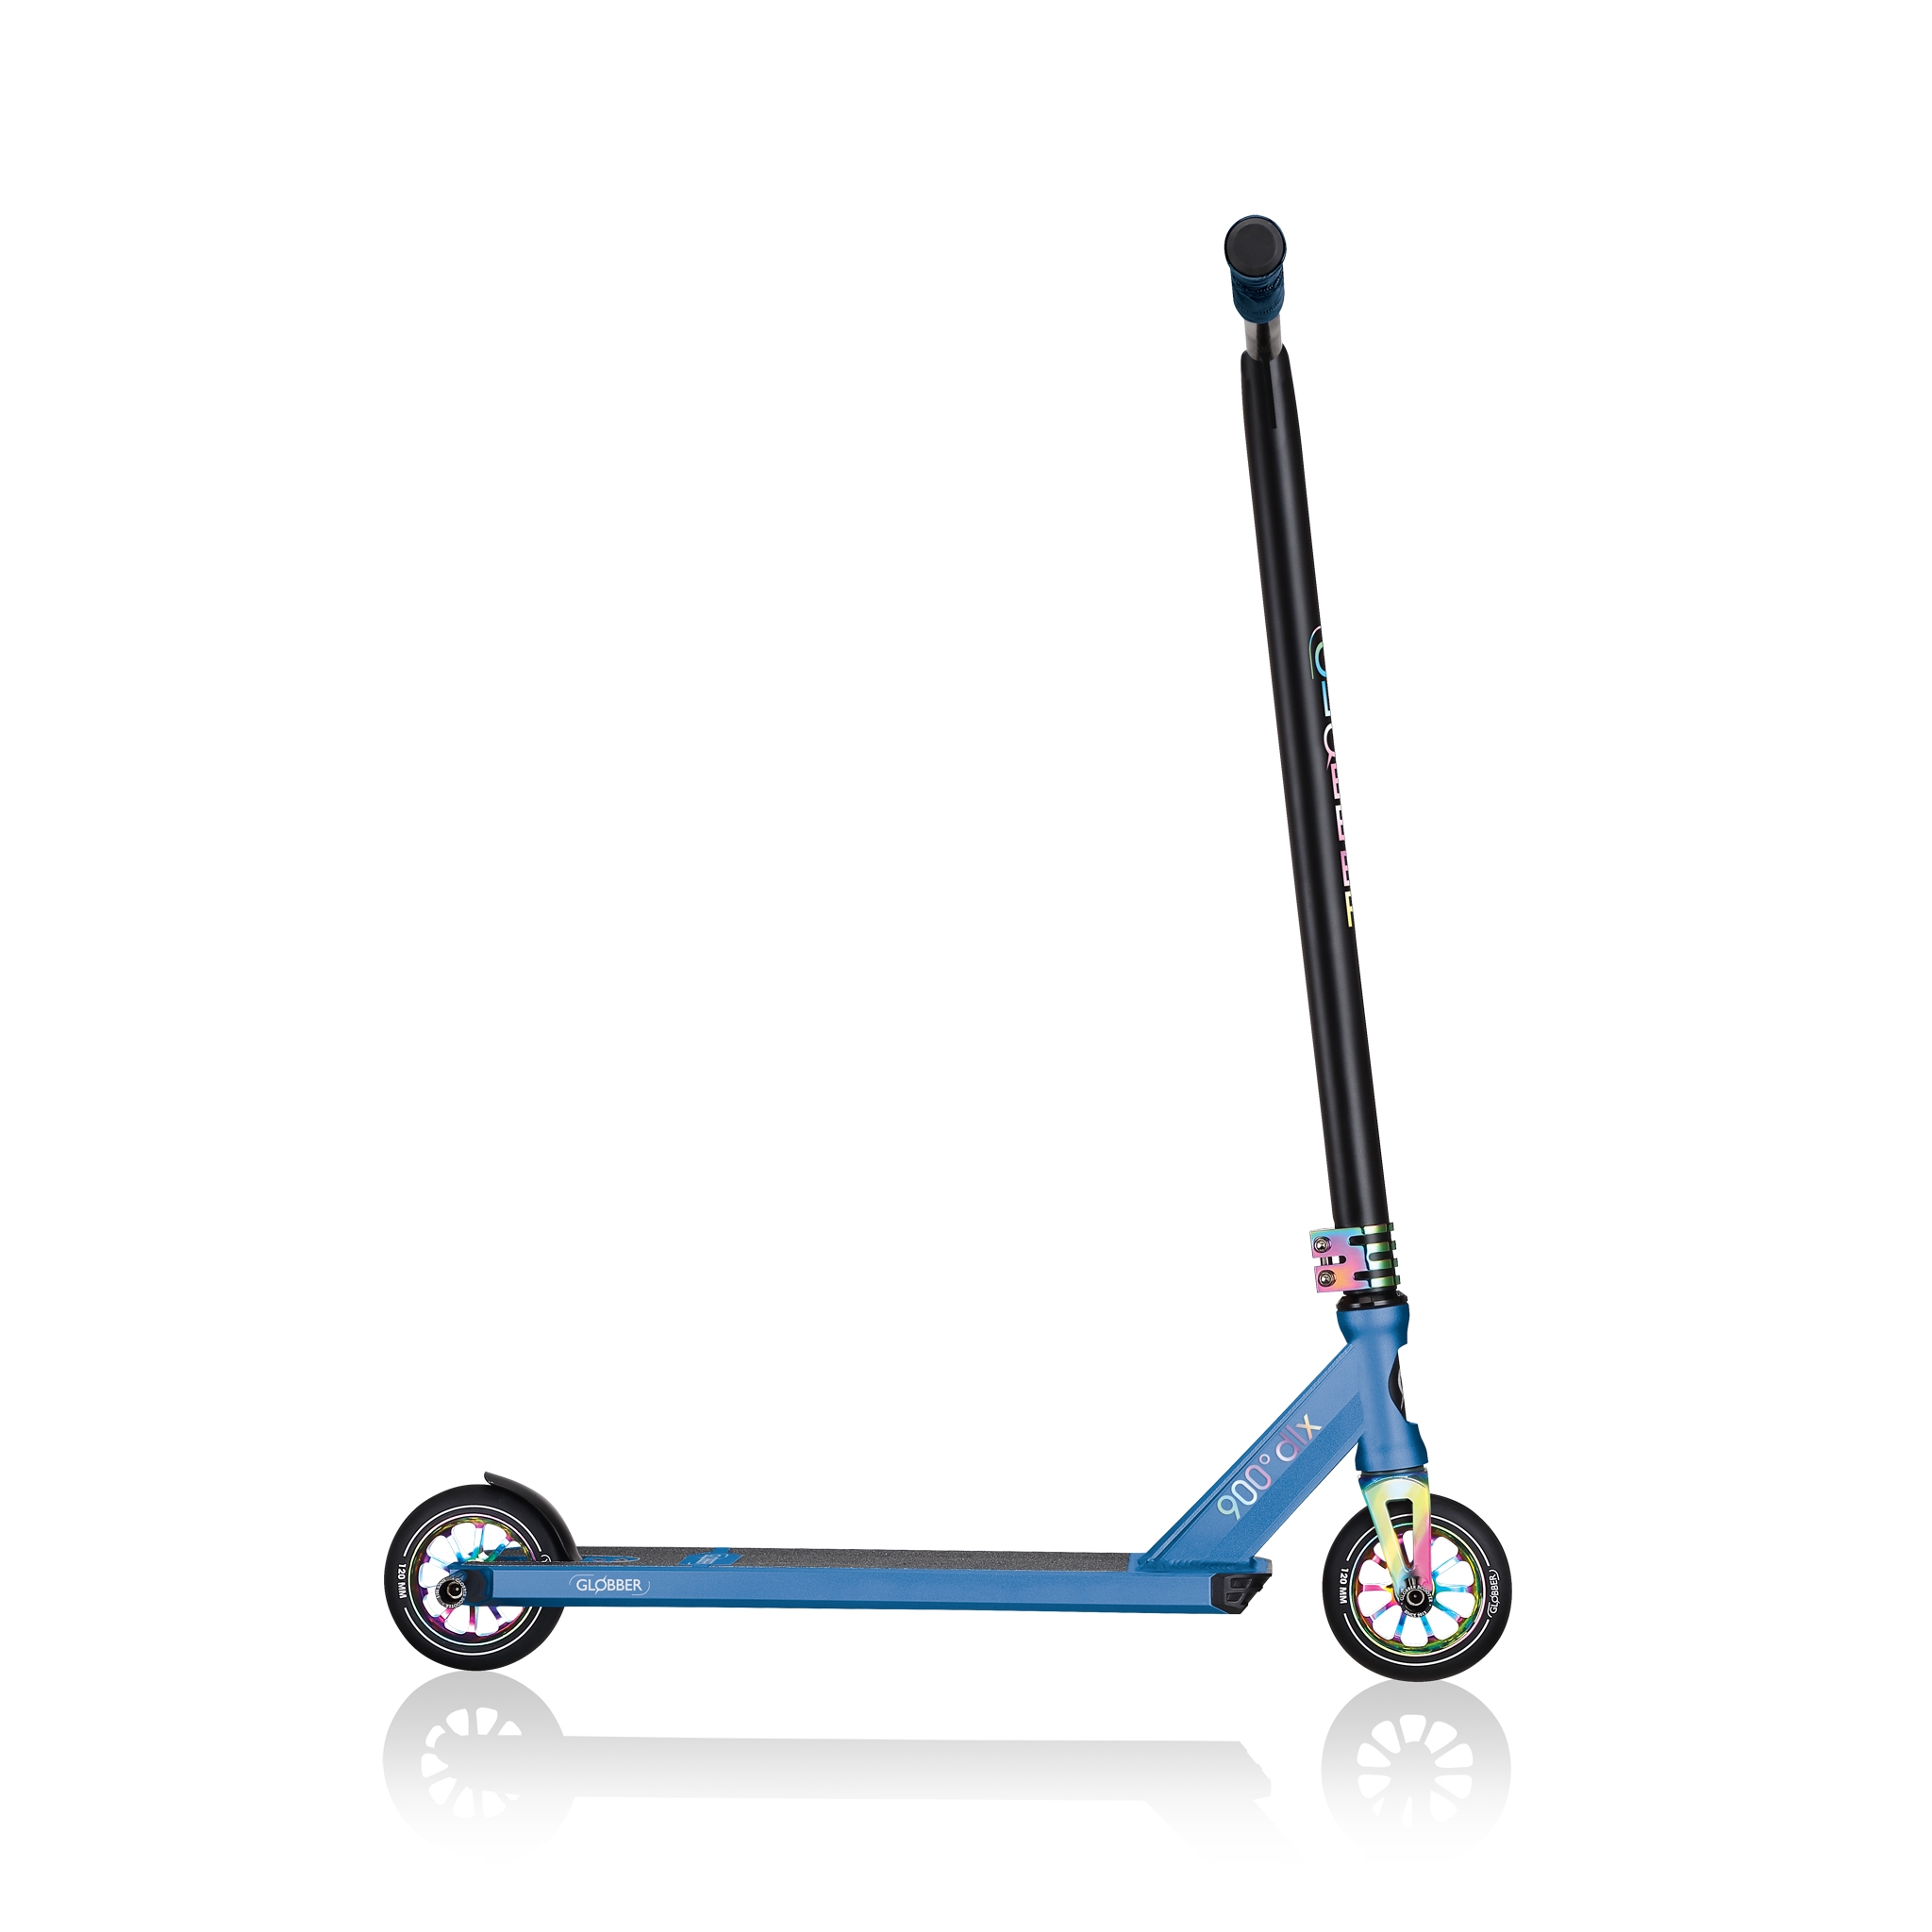 high-quality-stunt-scooter-with-120mm-wheels-Globber-GS-900-DELUXE 4